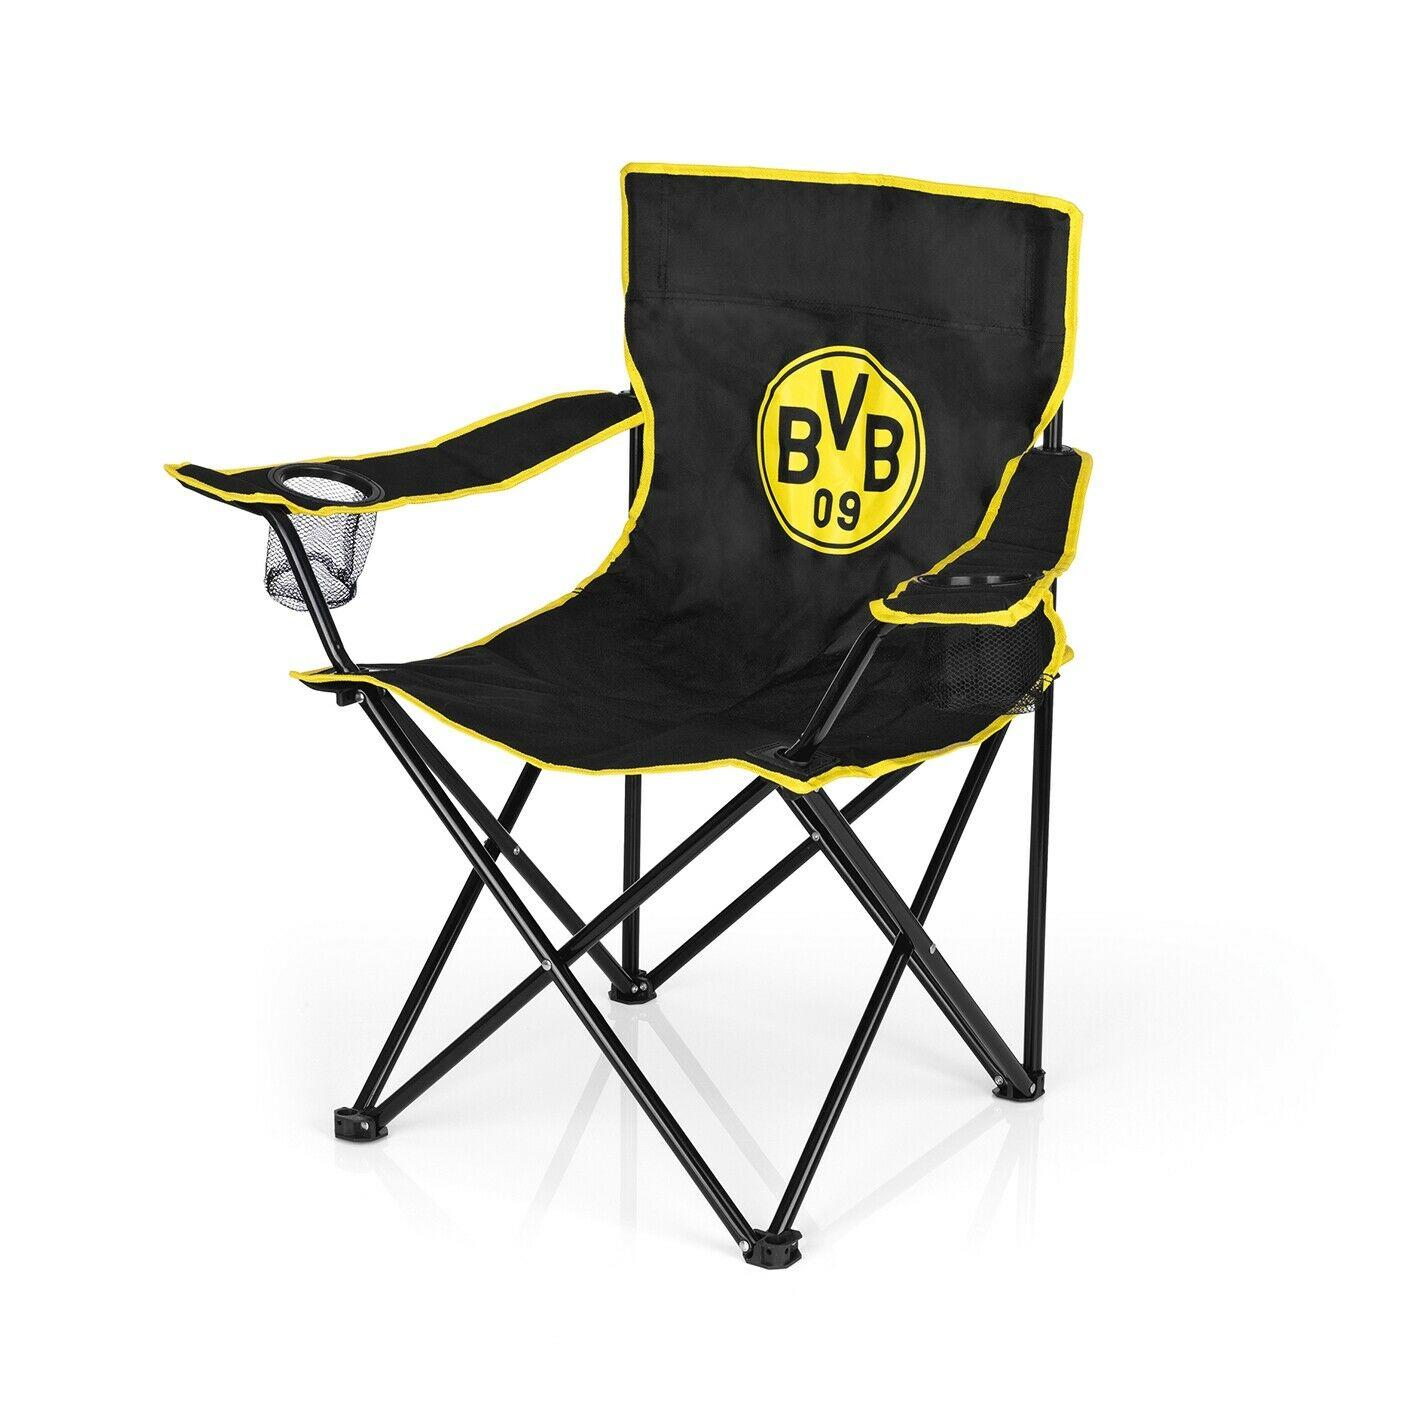 Read more about the article BVB Campingstuhl extrem günstig kaufen (Netto)